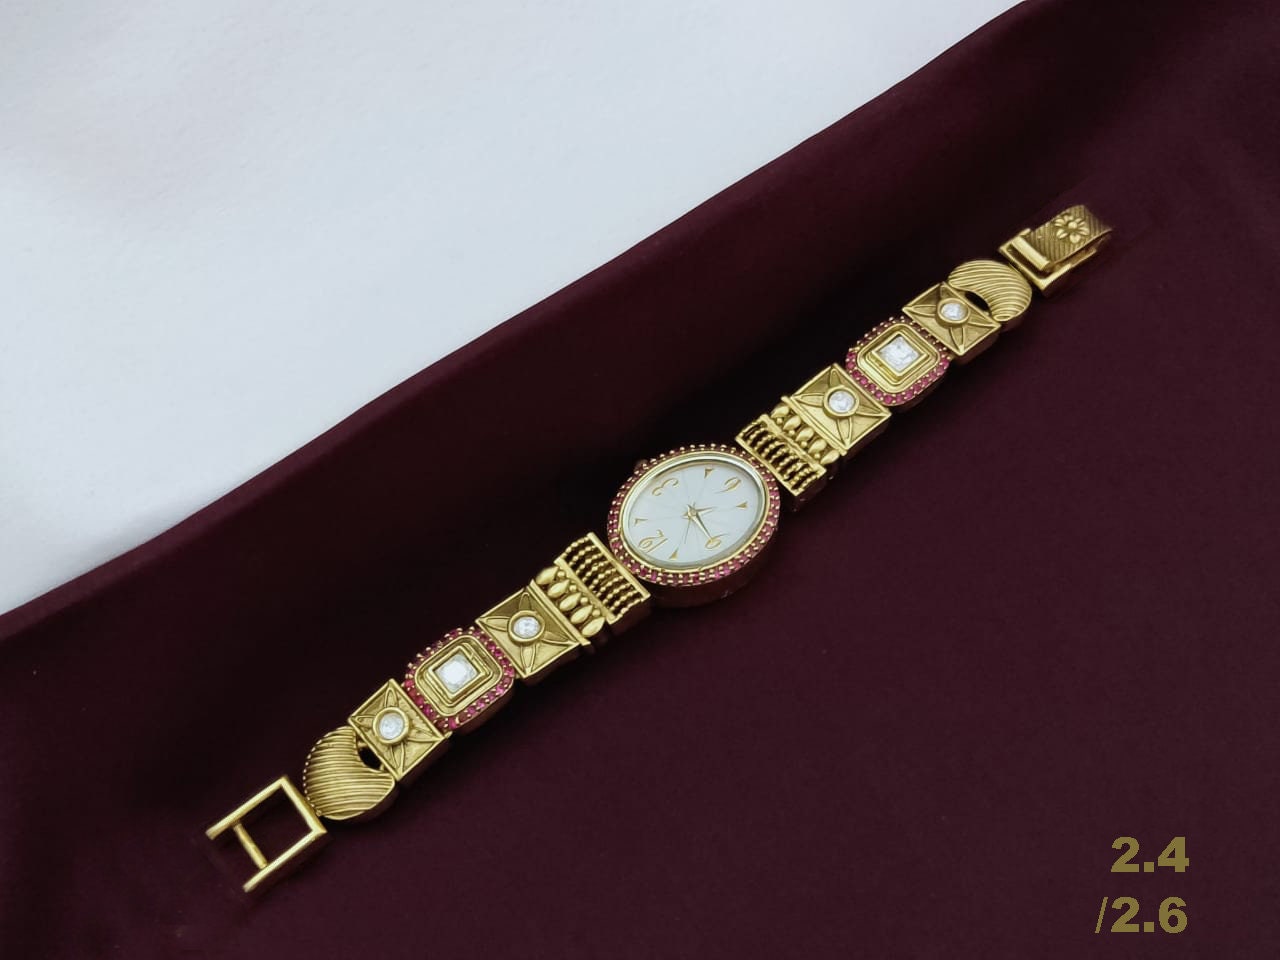 Antique Look gold plated watch Ladies watch | Women's designer watch for small wrist | Oval dial bracelet watch decorated with ruby stones